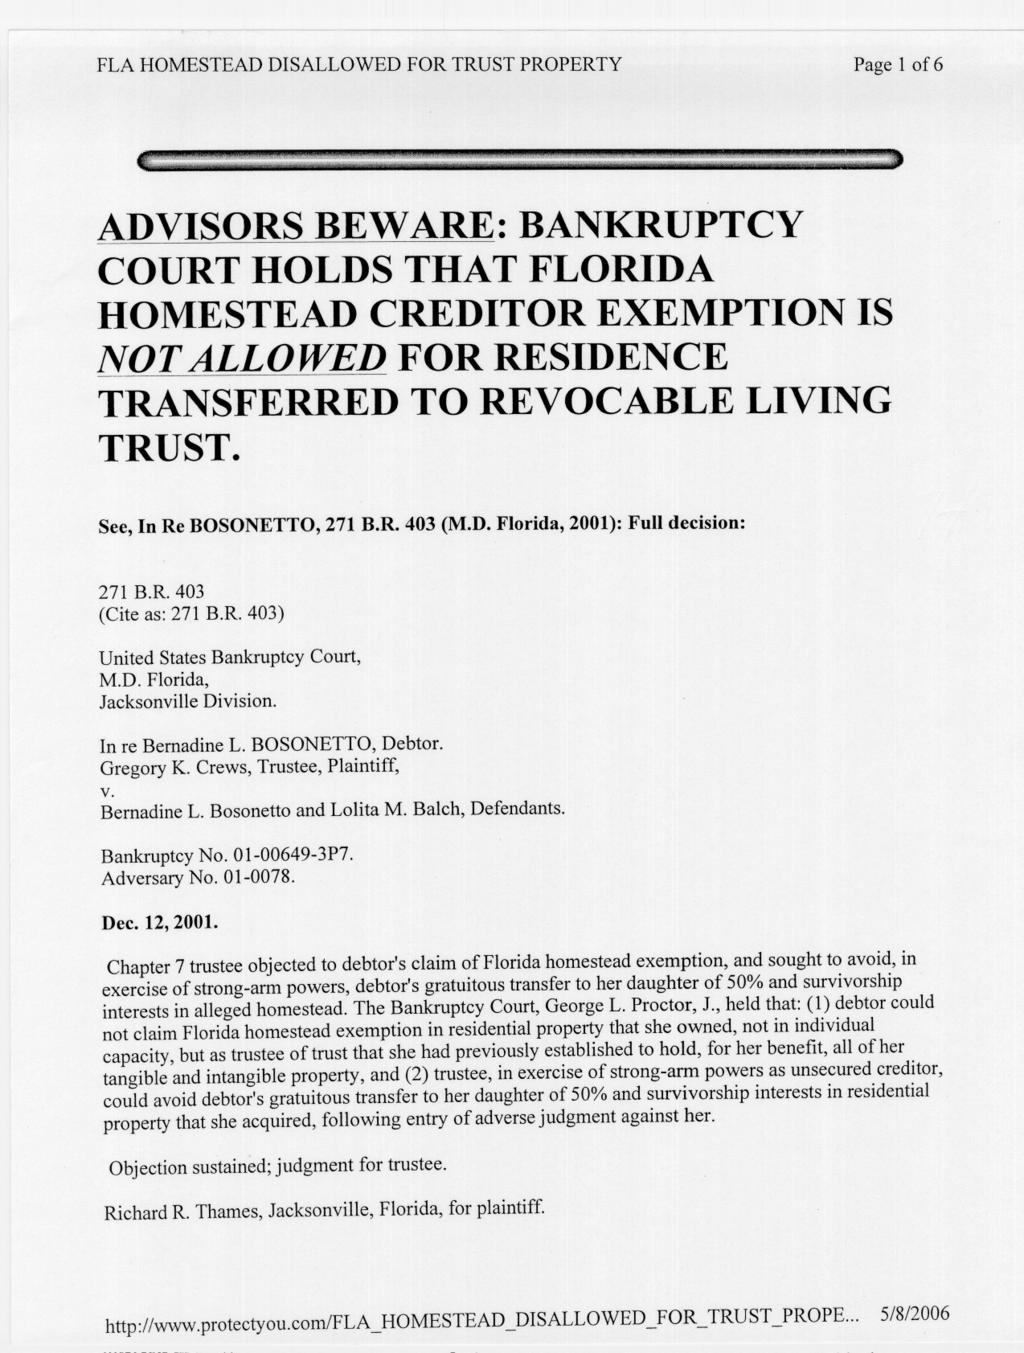 Page 1 of6 " «om ADVISORS BEWARE: BANKRUPTCY COURT HOLDS THAT FLORIDA HOMESTEAD CREDITOR EXEMPTION IS NOT ALLOWED FOR RESIDENCE TRANSFERRED TO REVOCABLE LIVING TRUST. See, In Re BOSONETTO, 271 B.R. 403 (M.